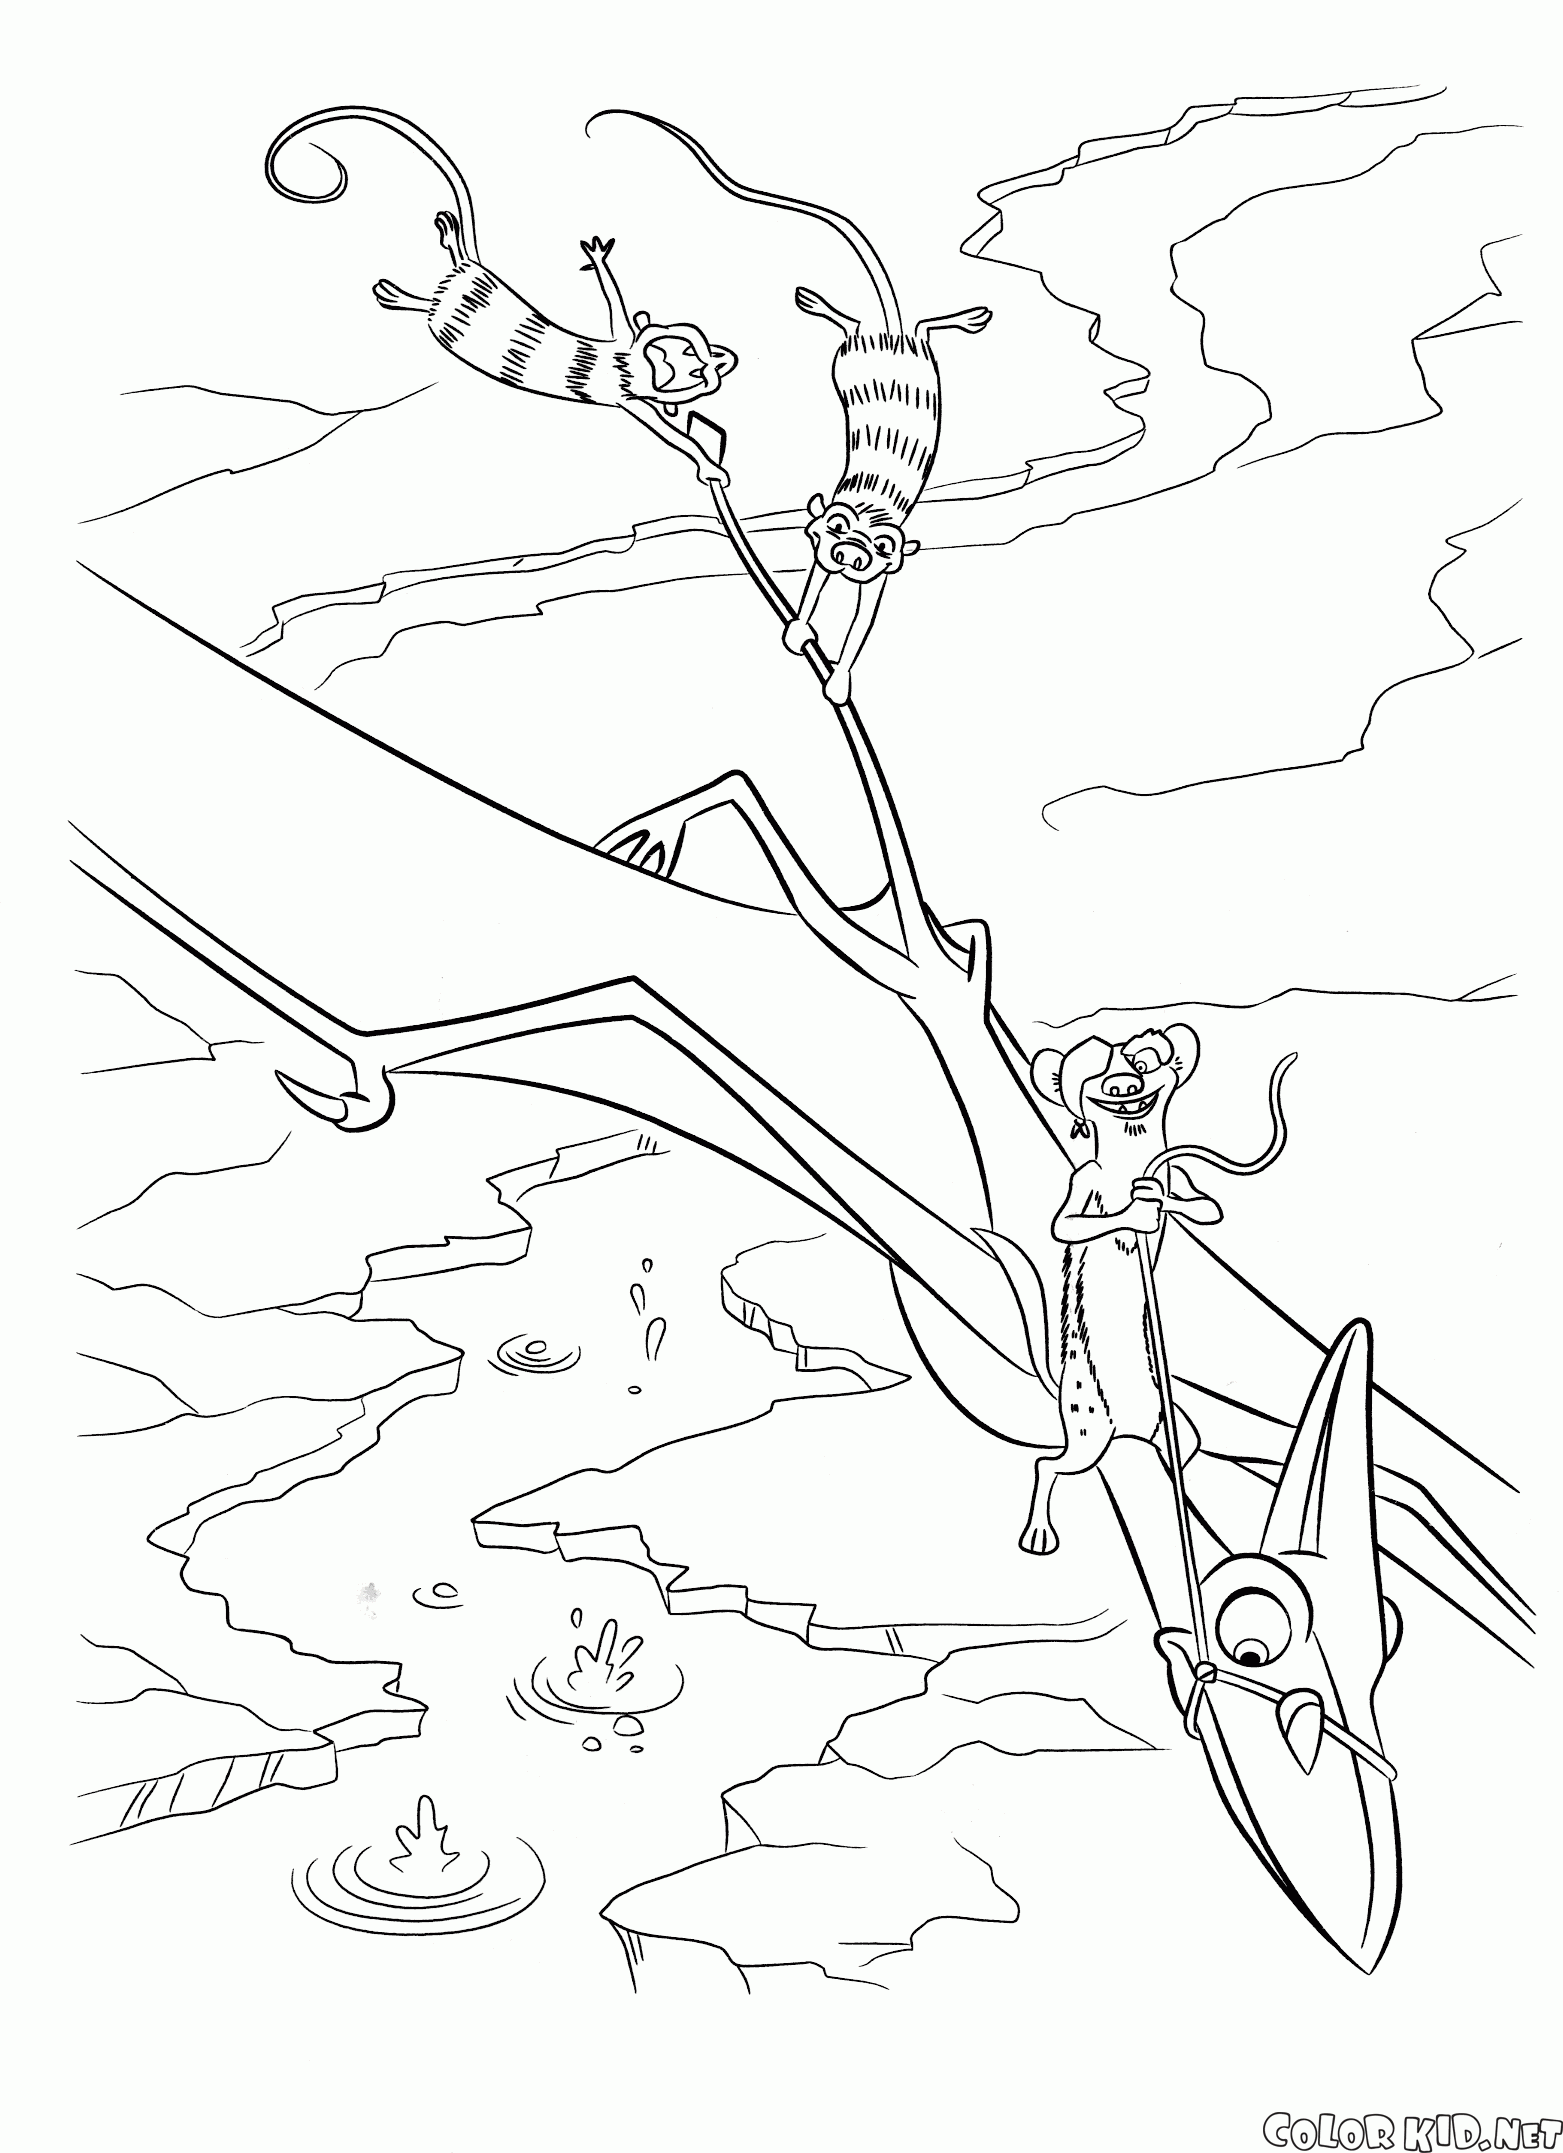 Coloring page - Ice Age: Dawn of the Dinosaurs